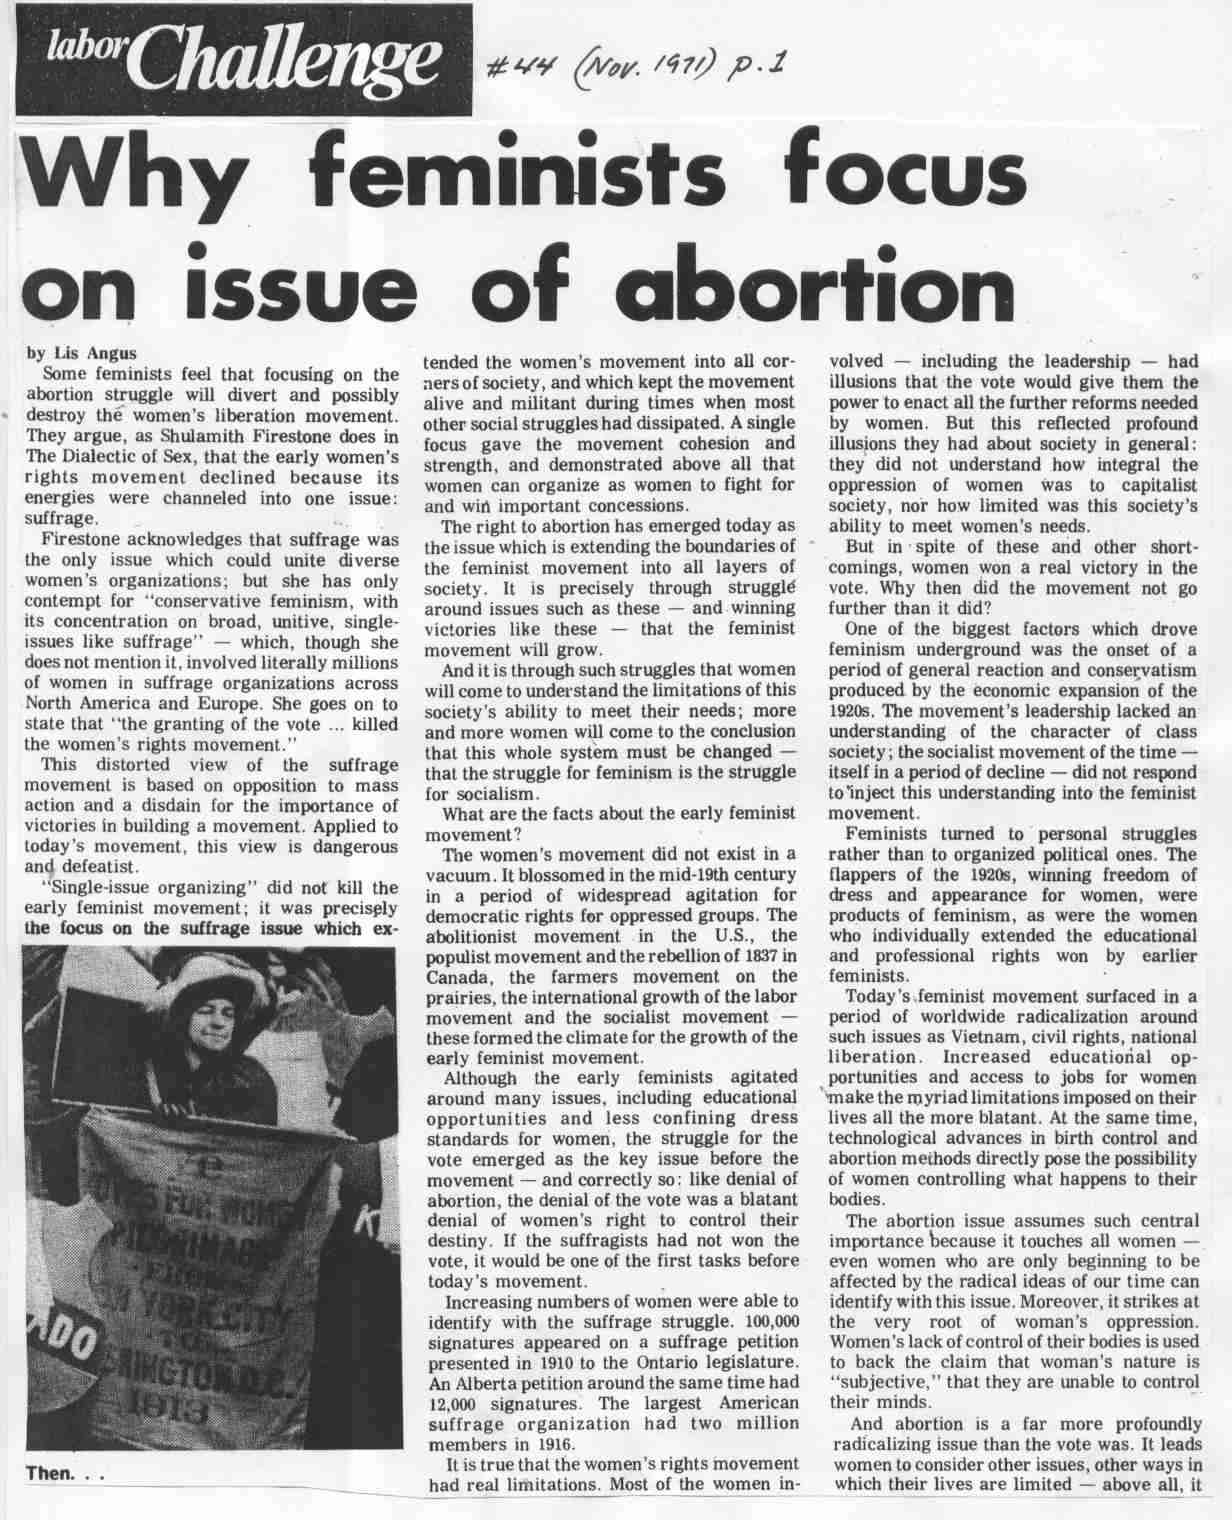 Womens Liberation part 4—The Status of Women in Canada